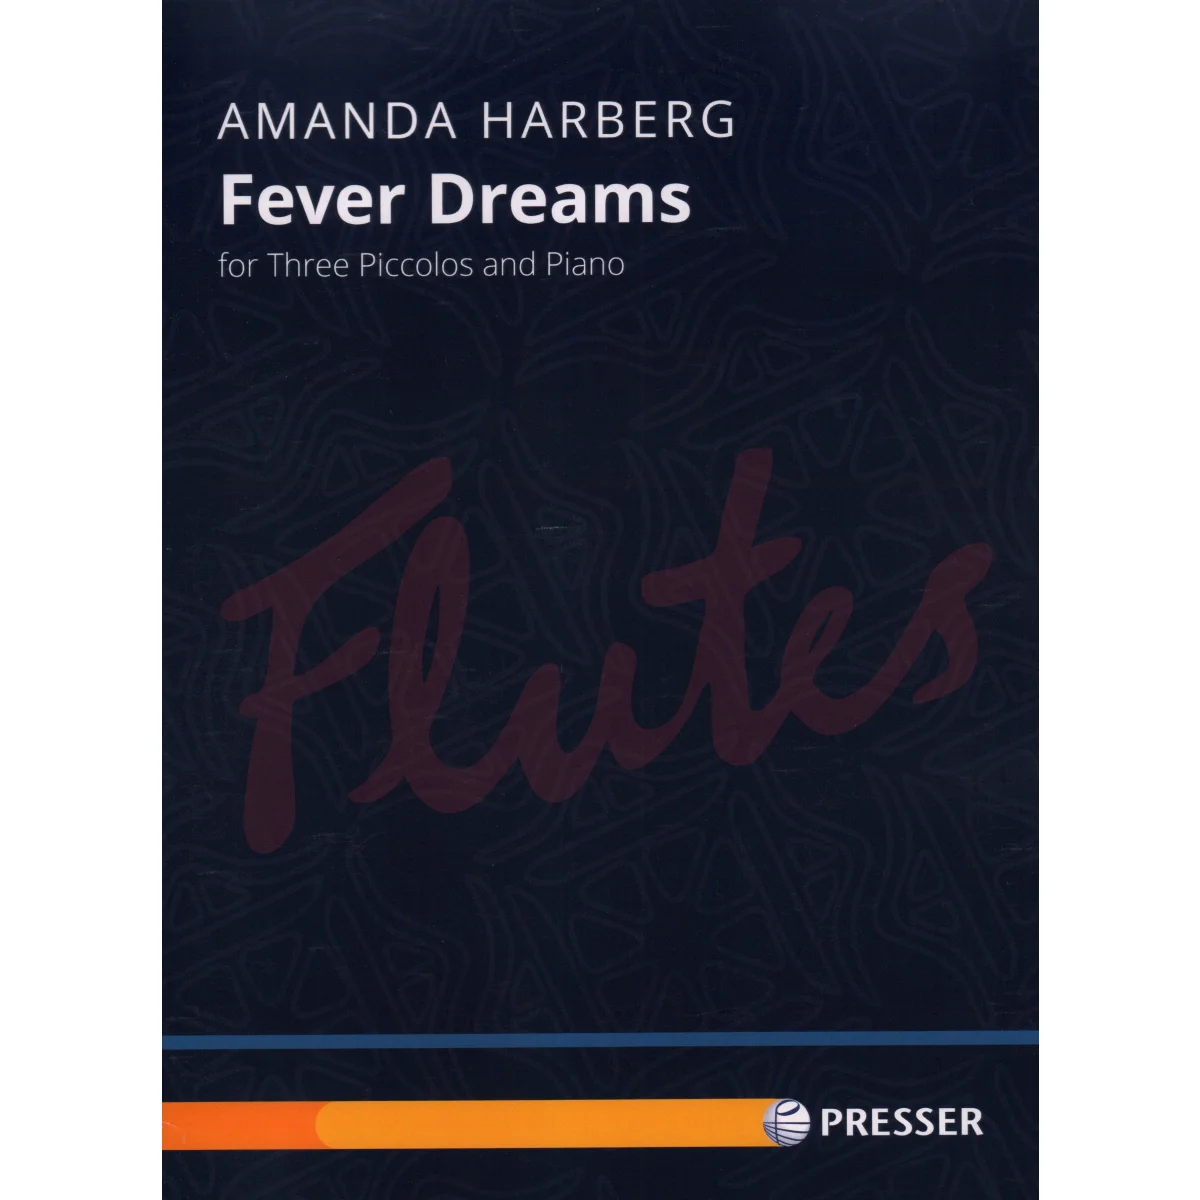 Fever Dreams for Three Piccolos and Piano